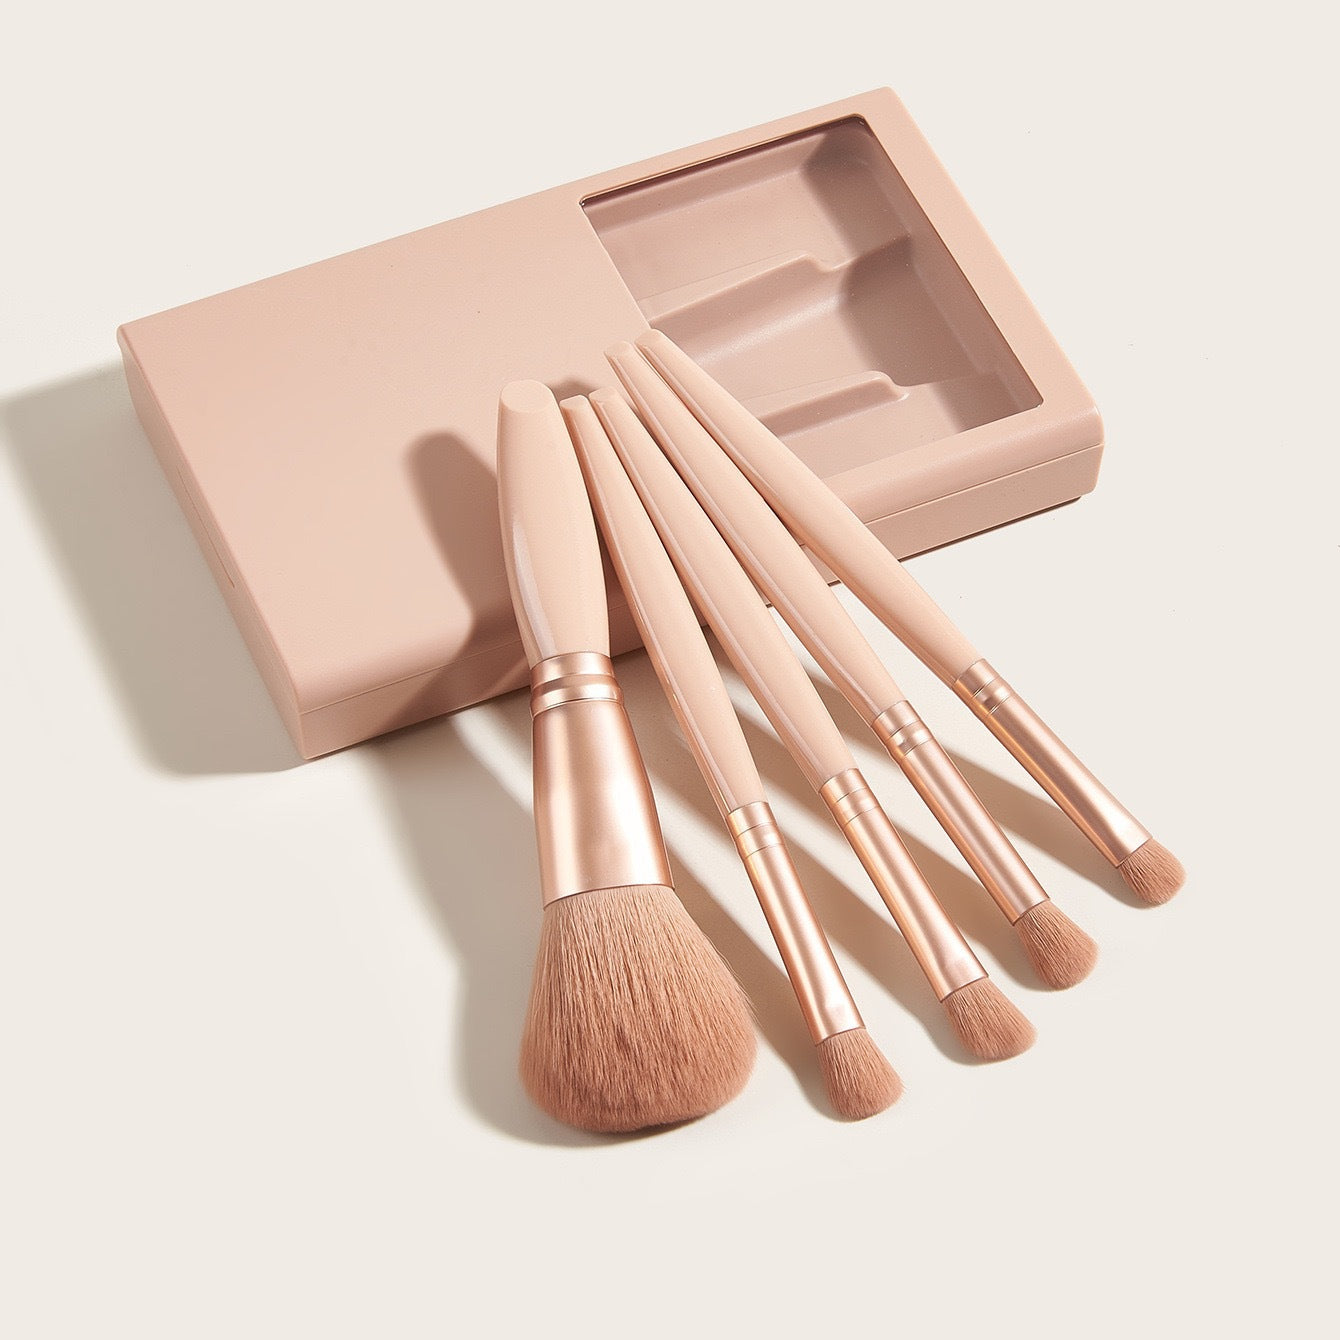 5 piece Makeup Brush Set With Mirrored Travel Case